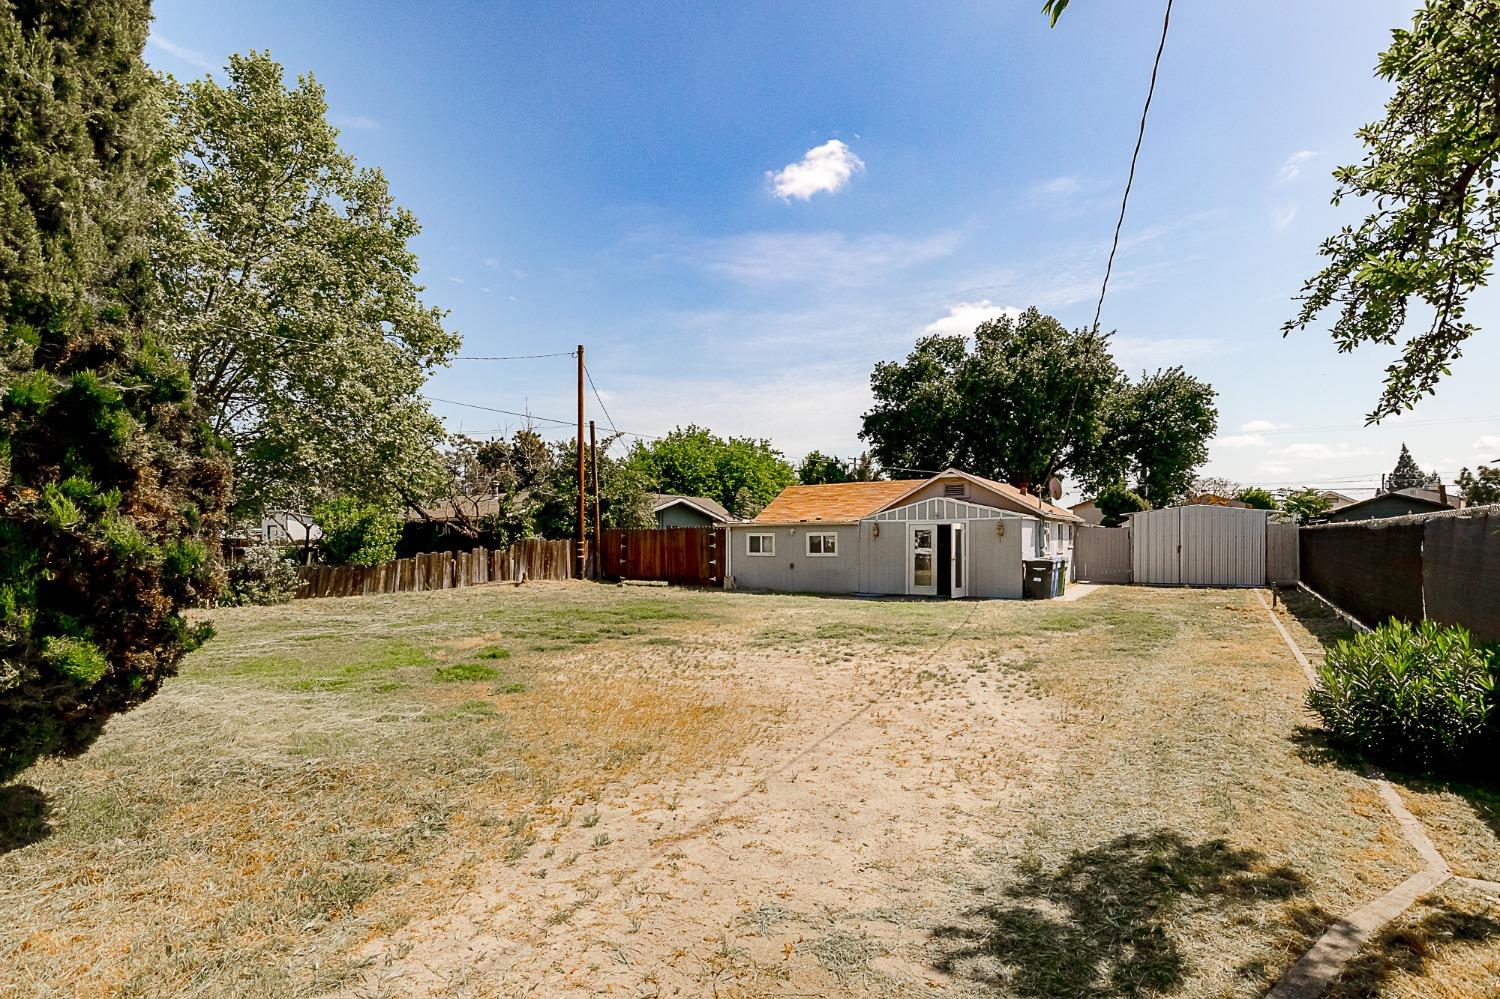 Photo of 1132 N Mitchell Ave in Turlock, CA